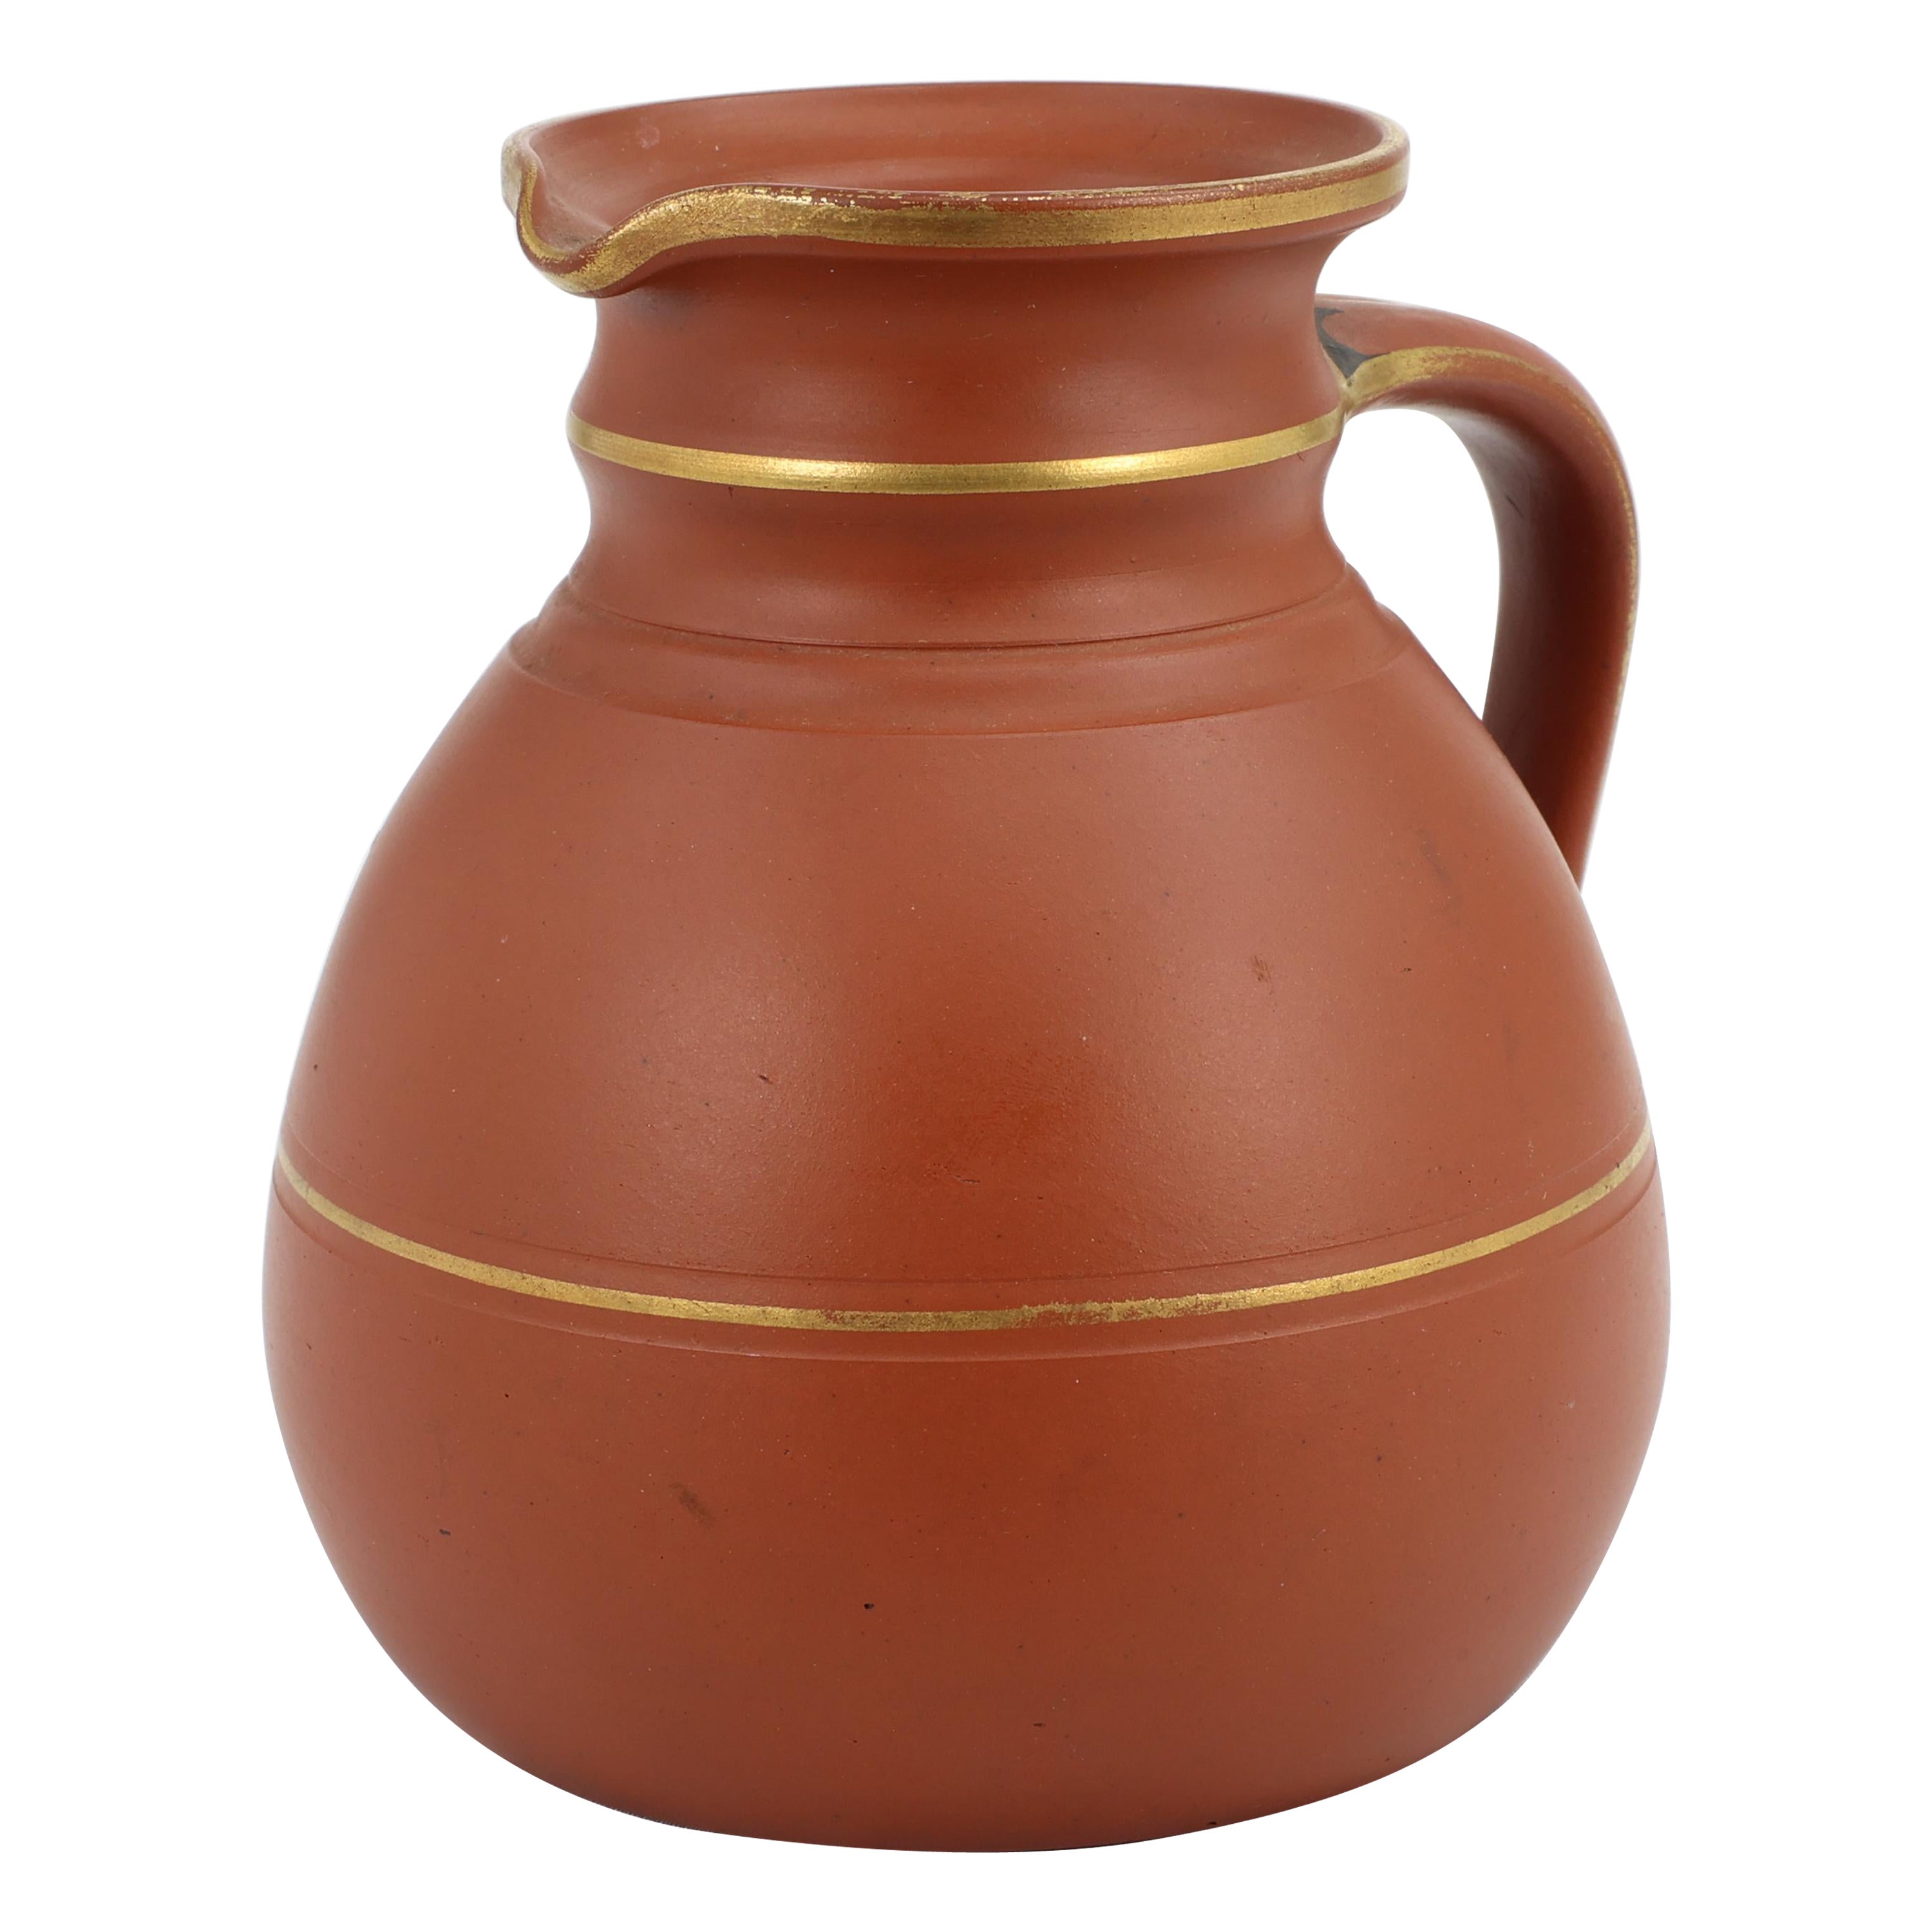 Prattware. A Gothic Revival terracotta jug with gilded line decoration. 